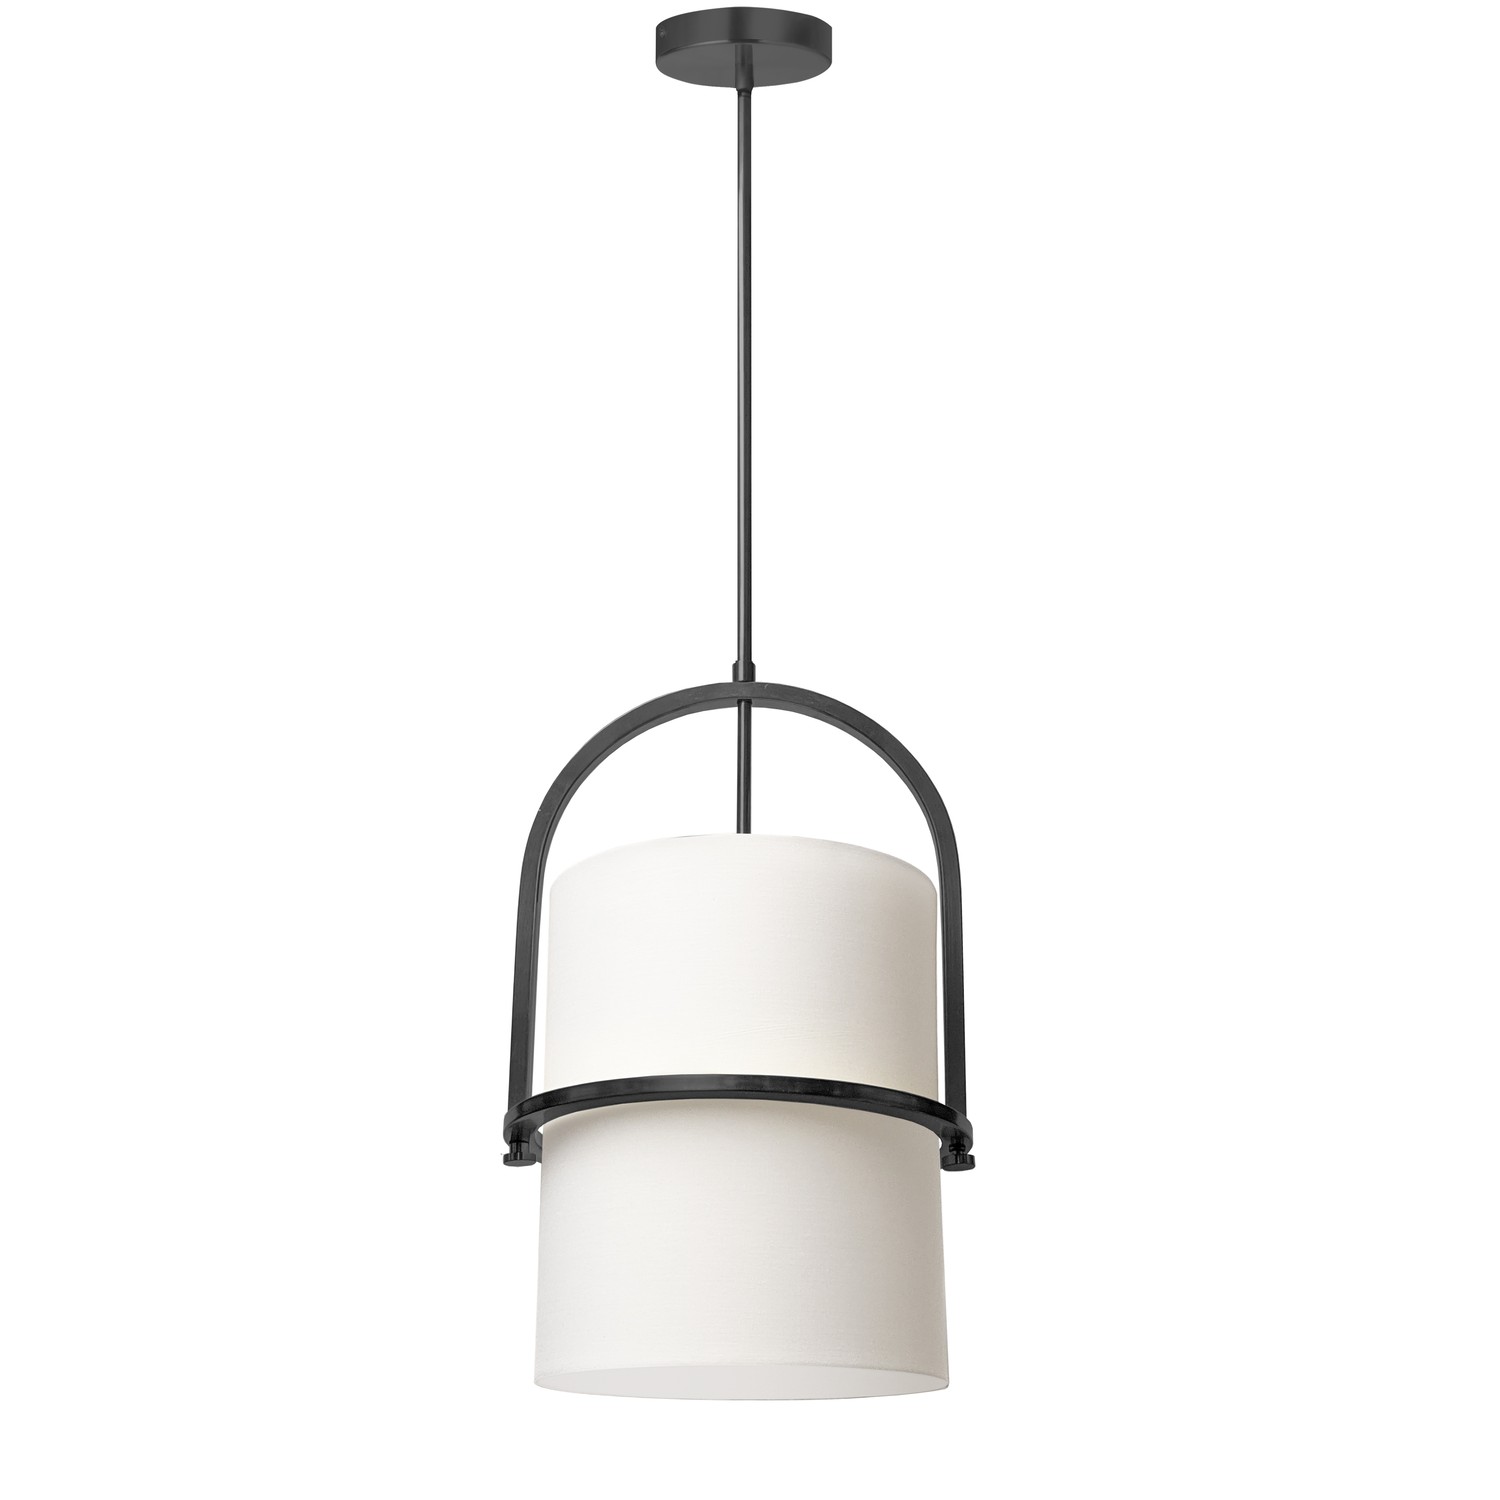 1 Light Incandescent Pendant, Matte Black with White Shade